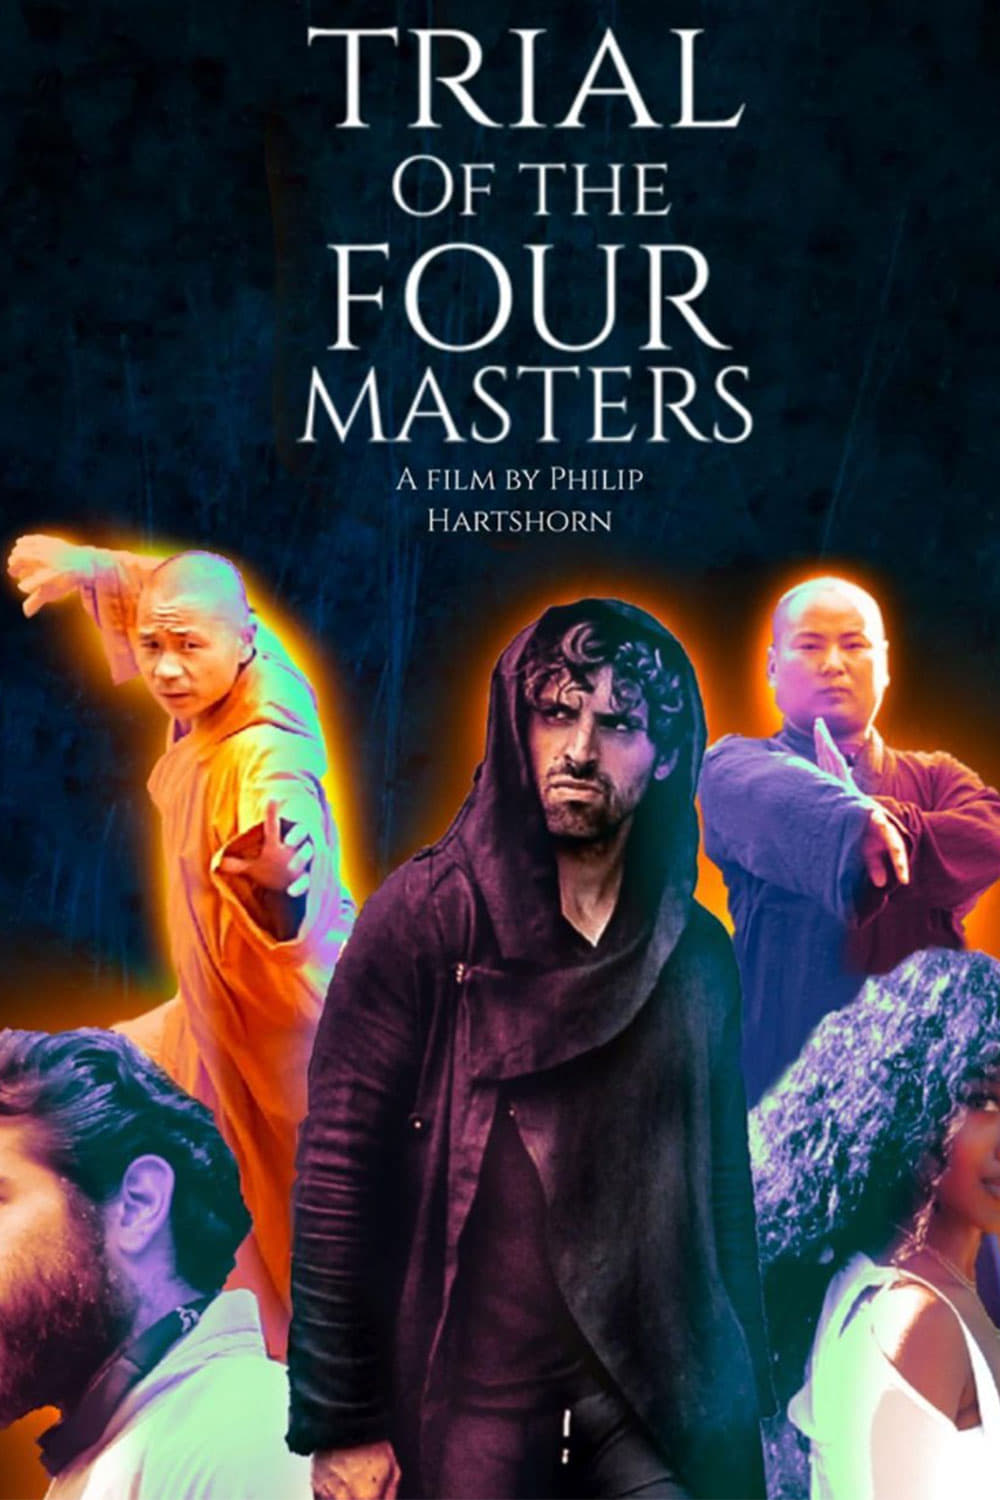 The Trial of the 4 Warrior Monk Masters